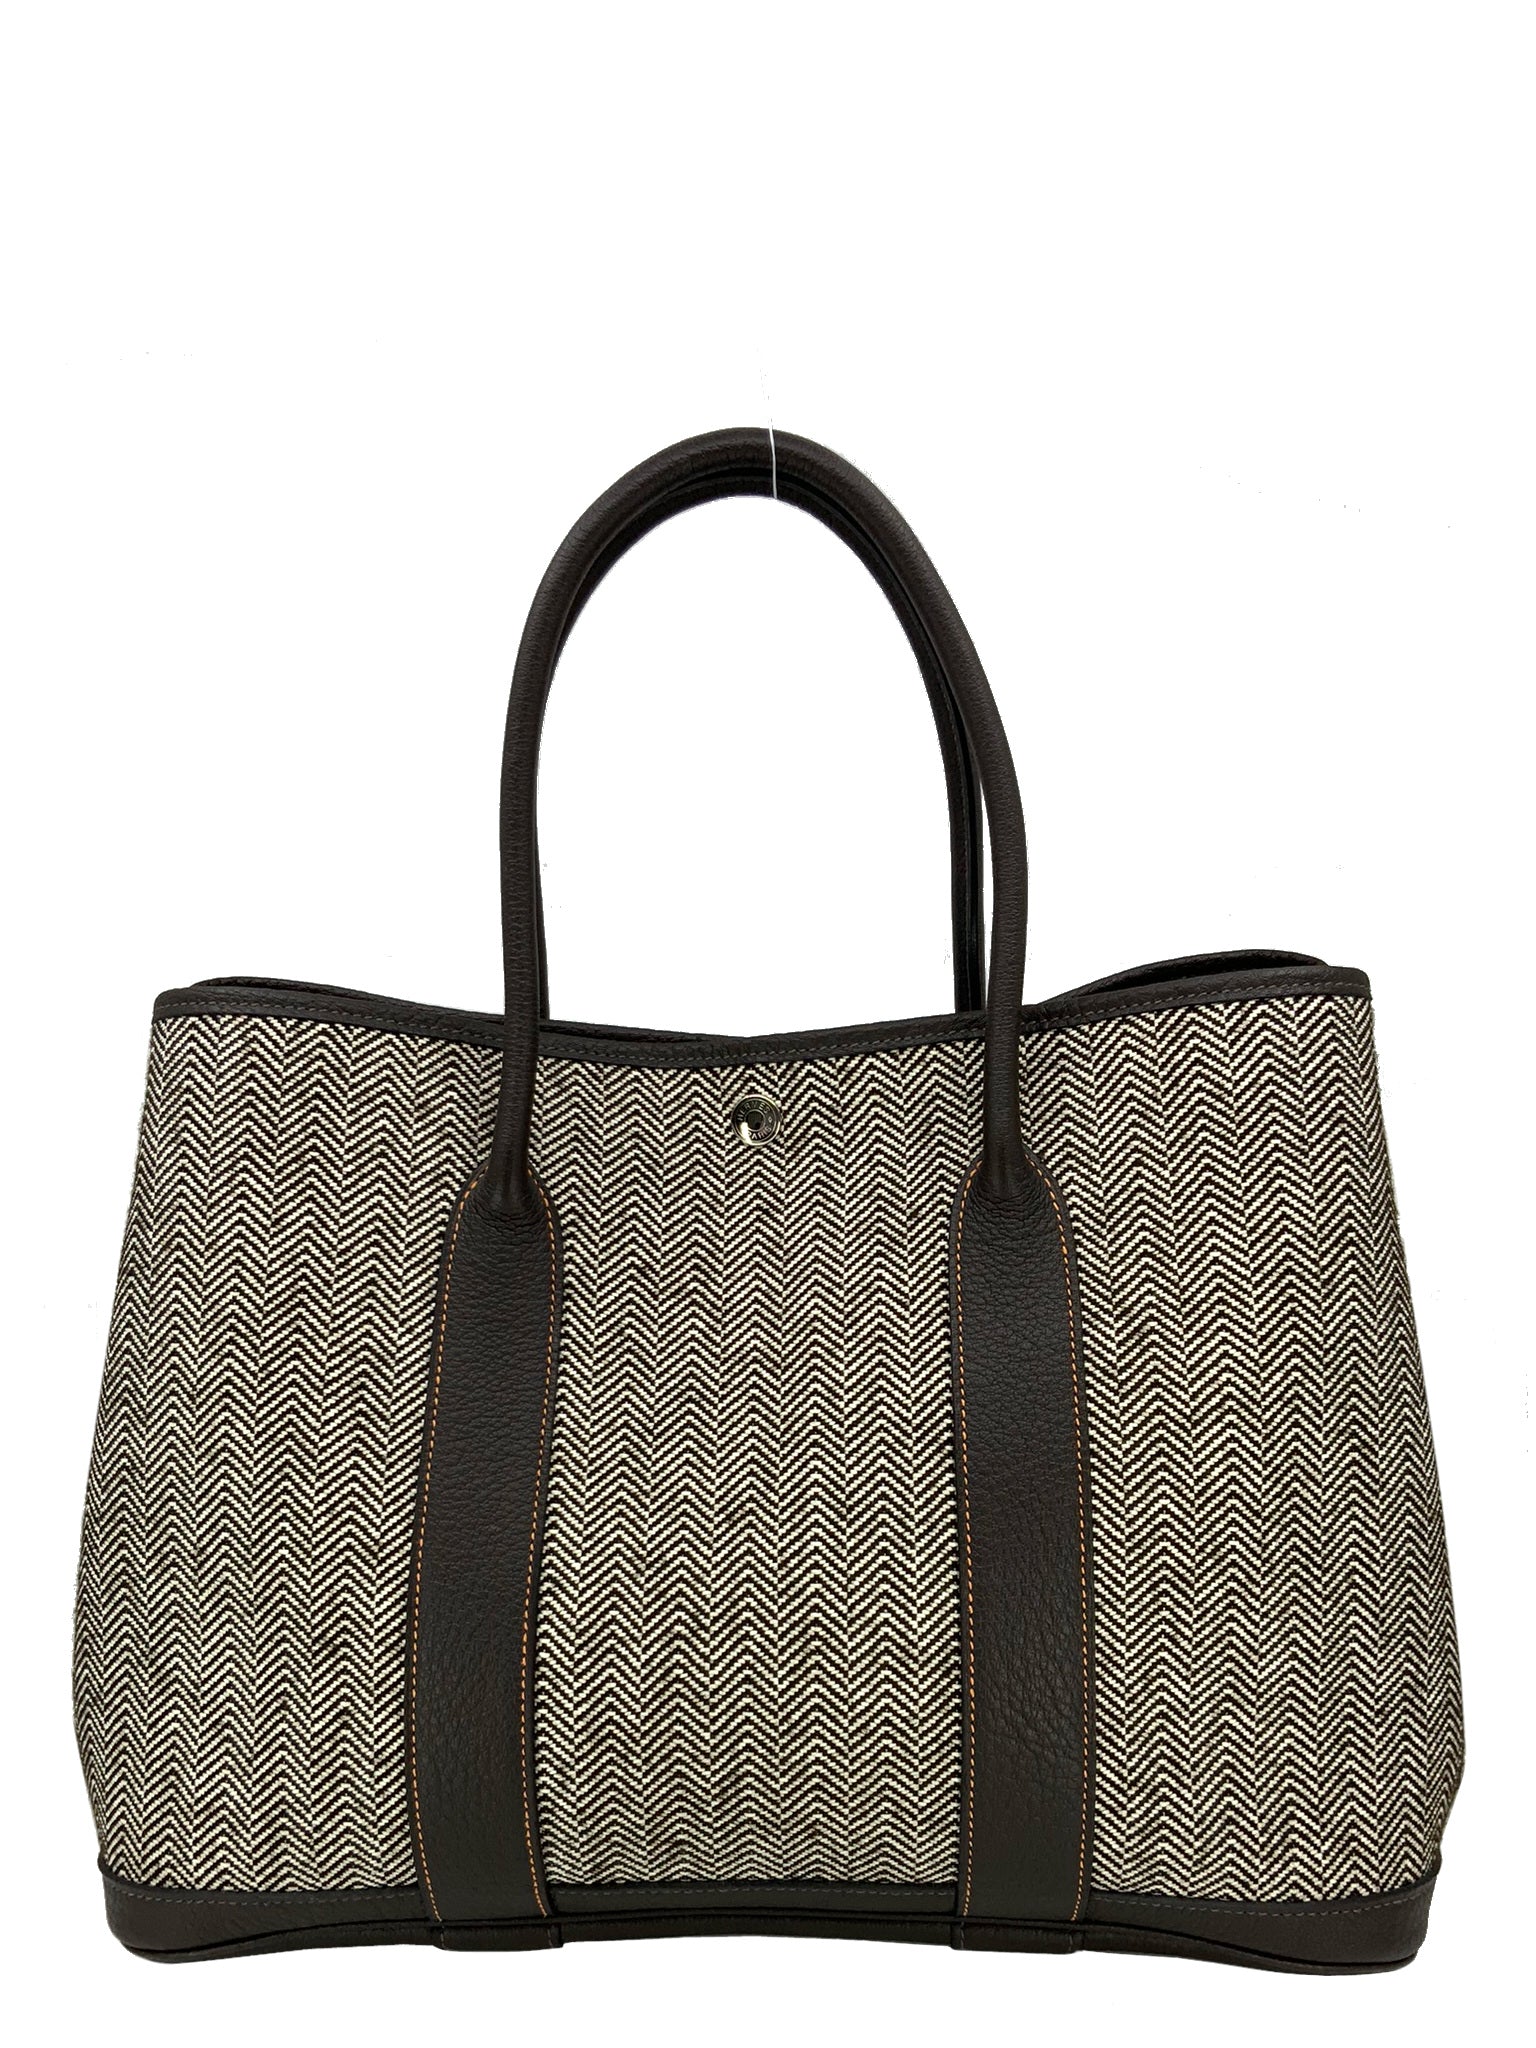 Hermes Buffalo ia Leather Garden Party Tote